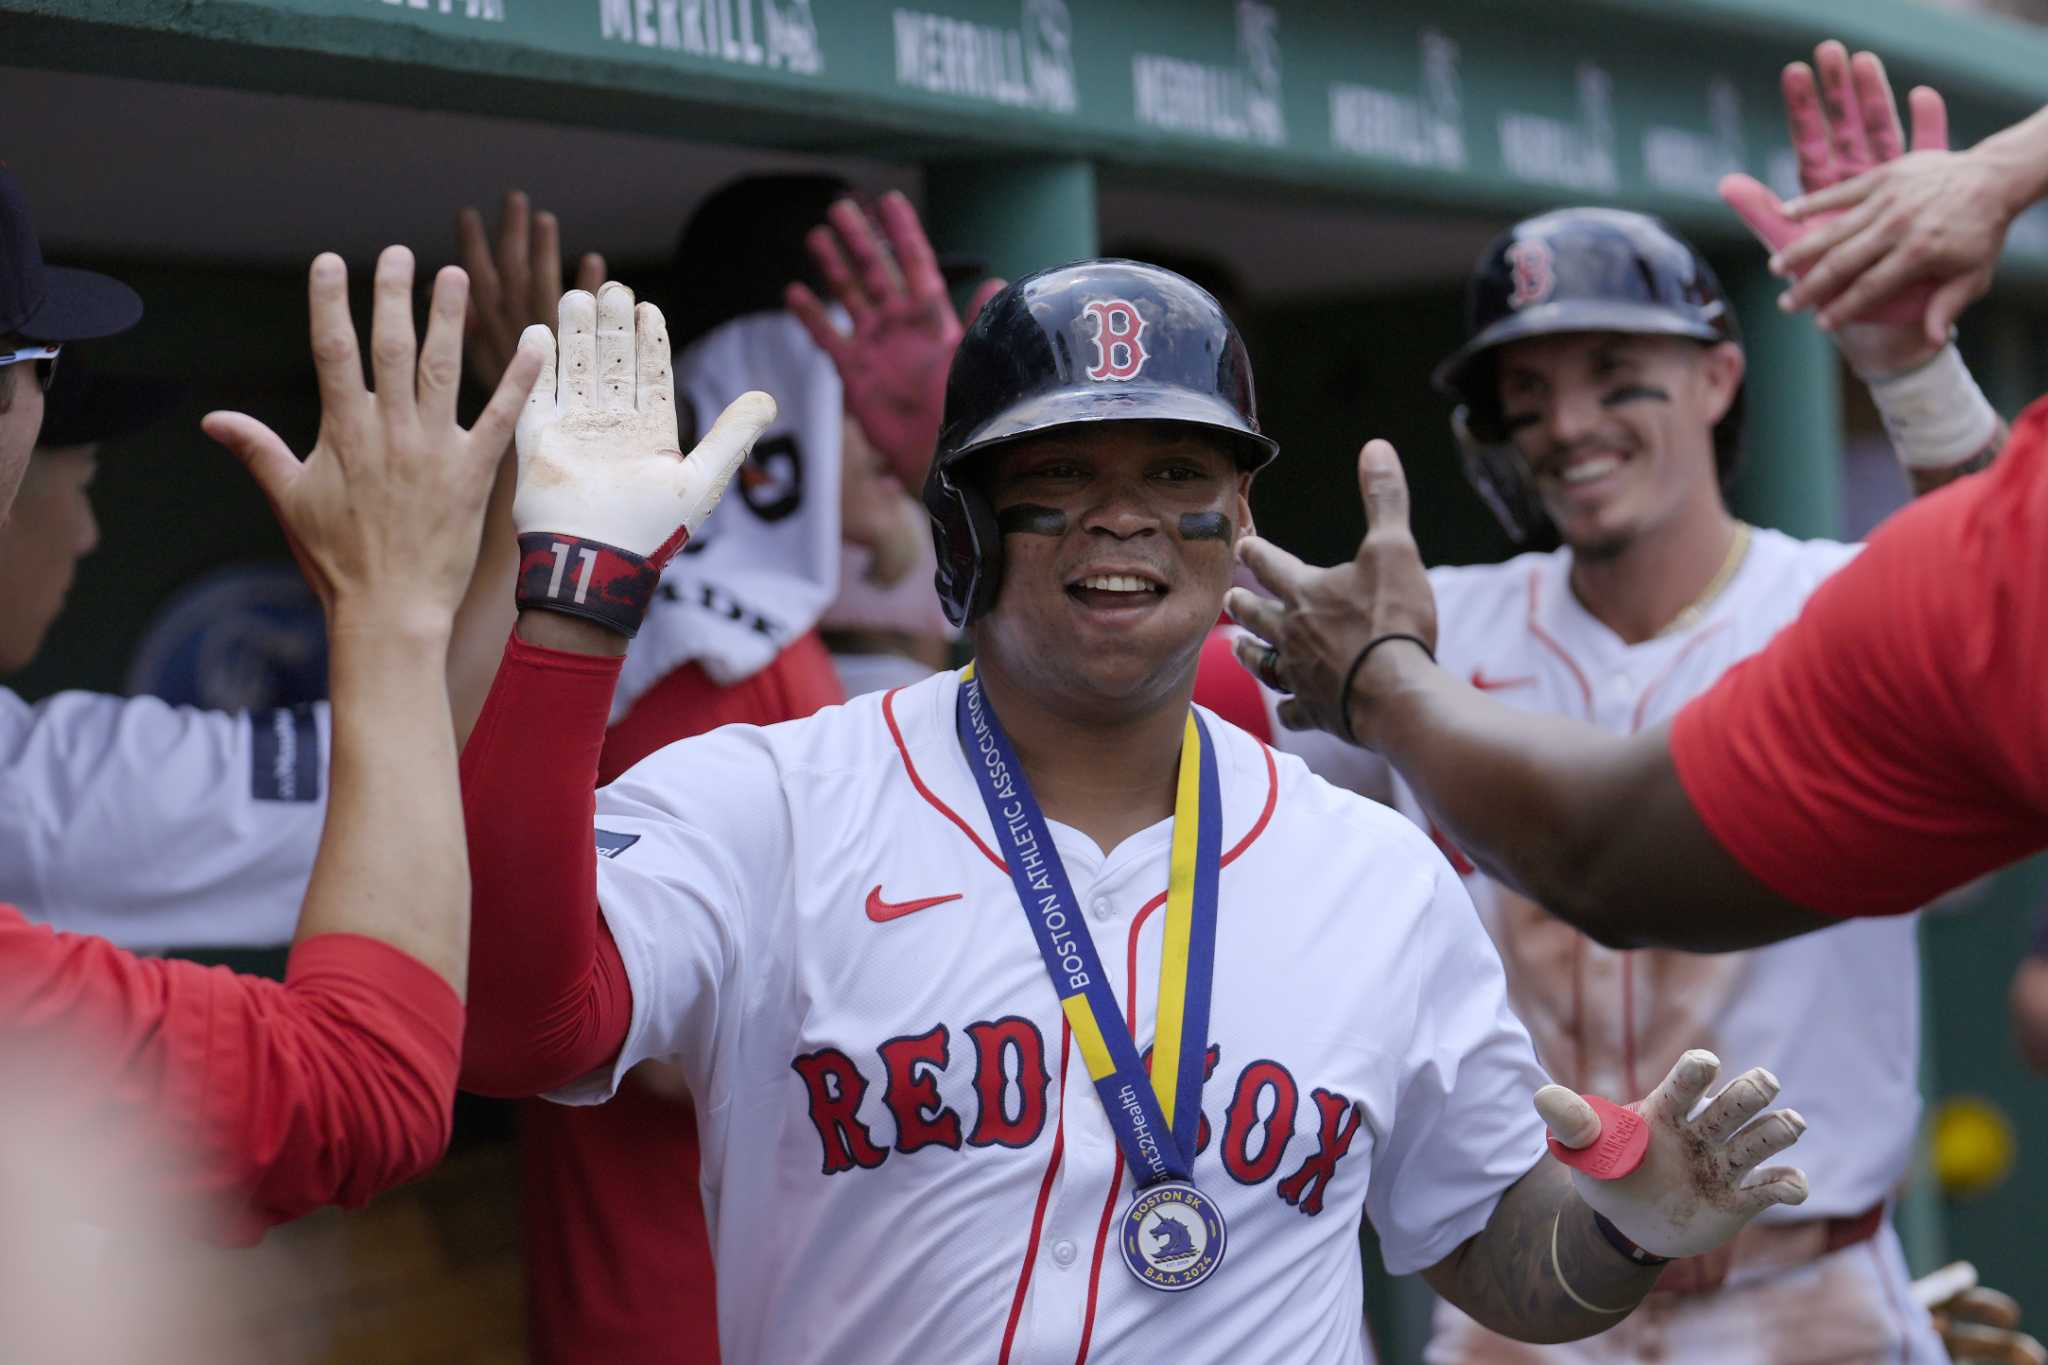 Rafael Devers' long HR breaks a seat in right field and Red Sox take series with 5-4 win over Royals